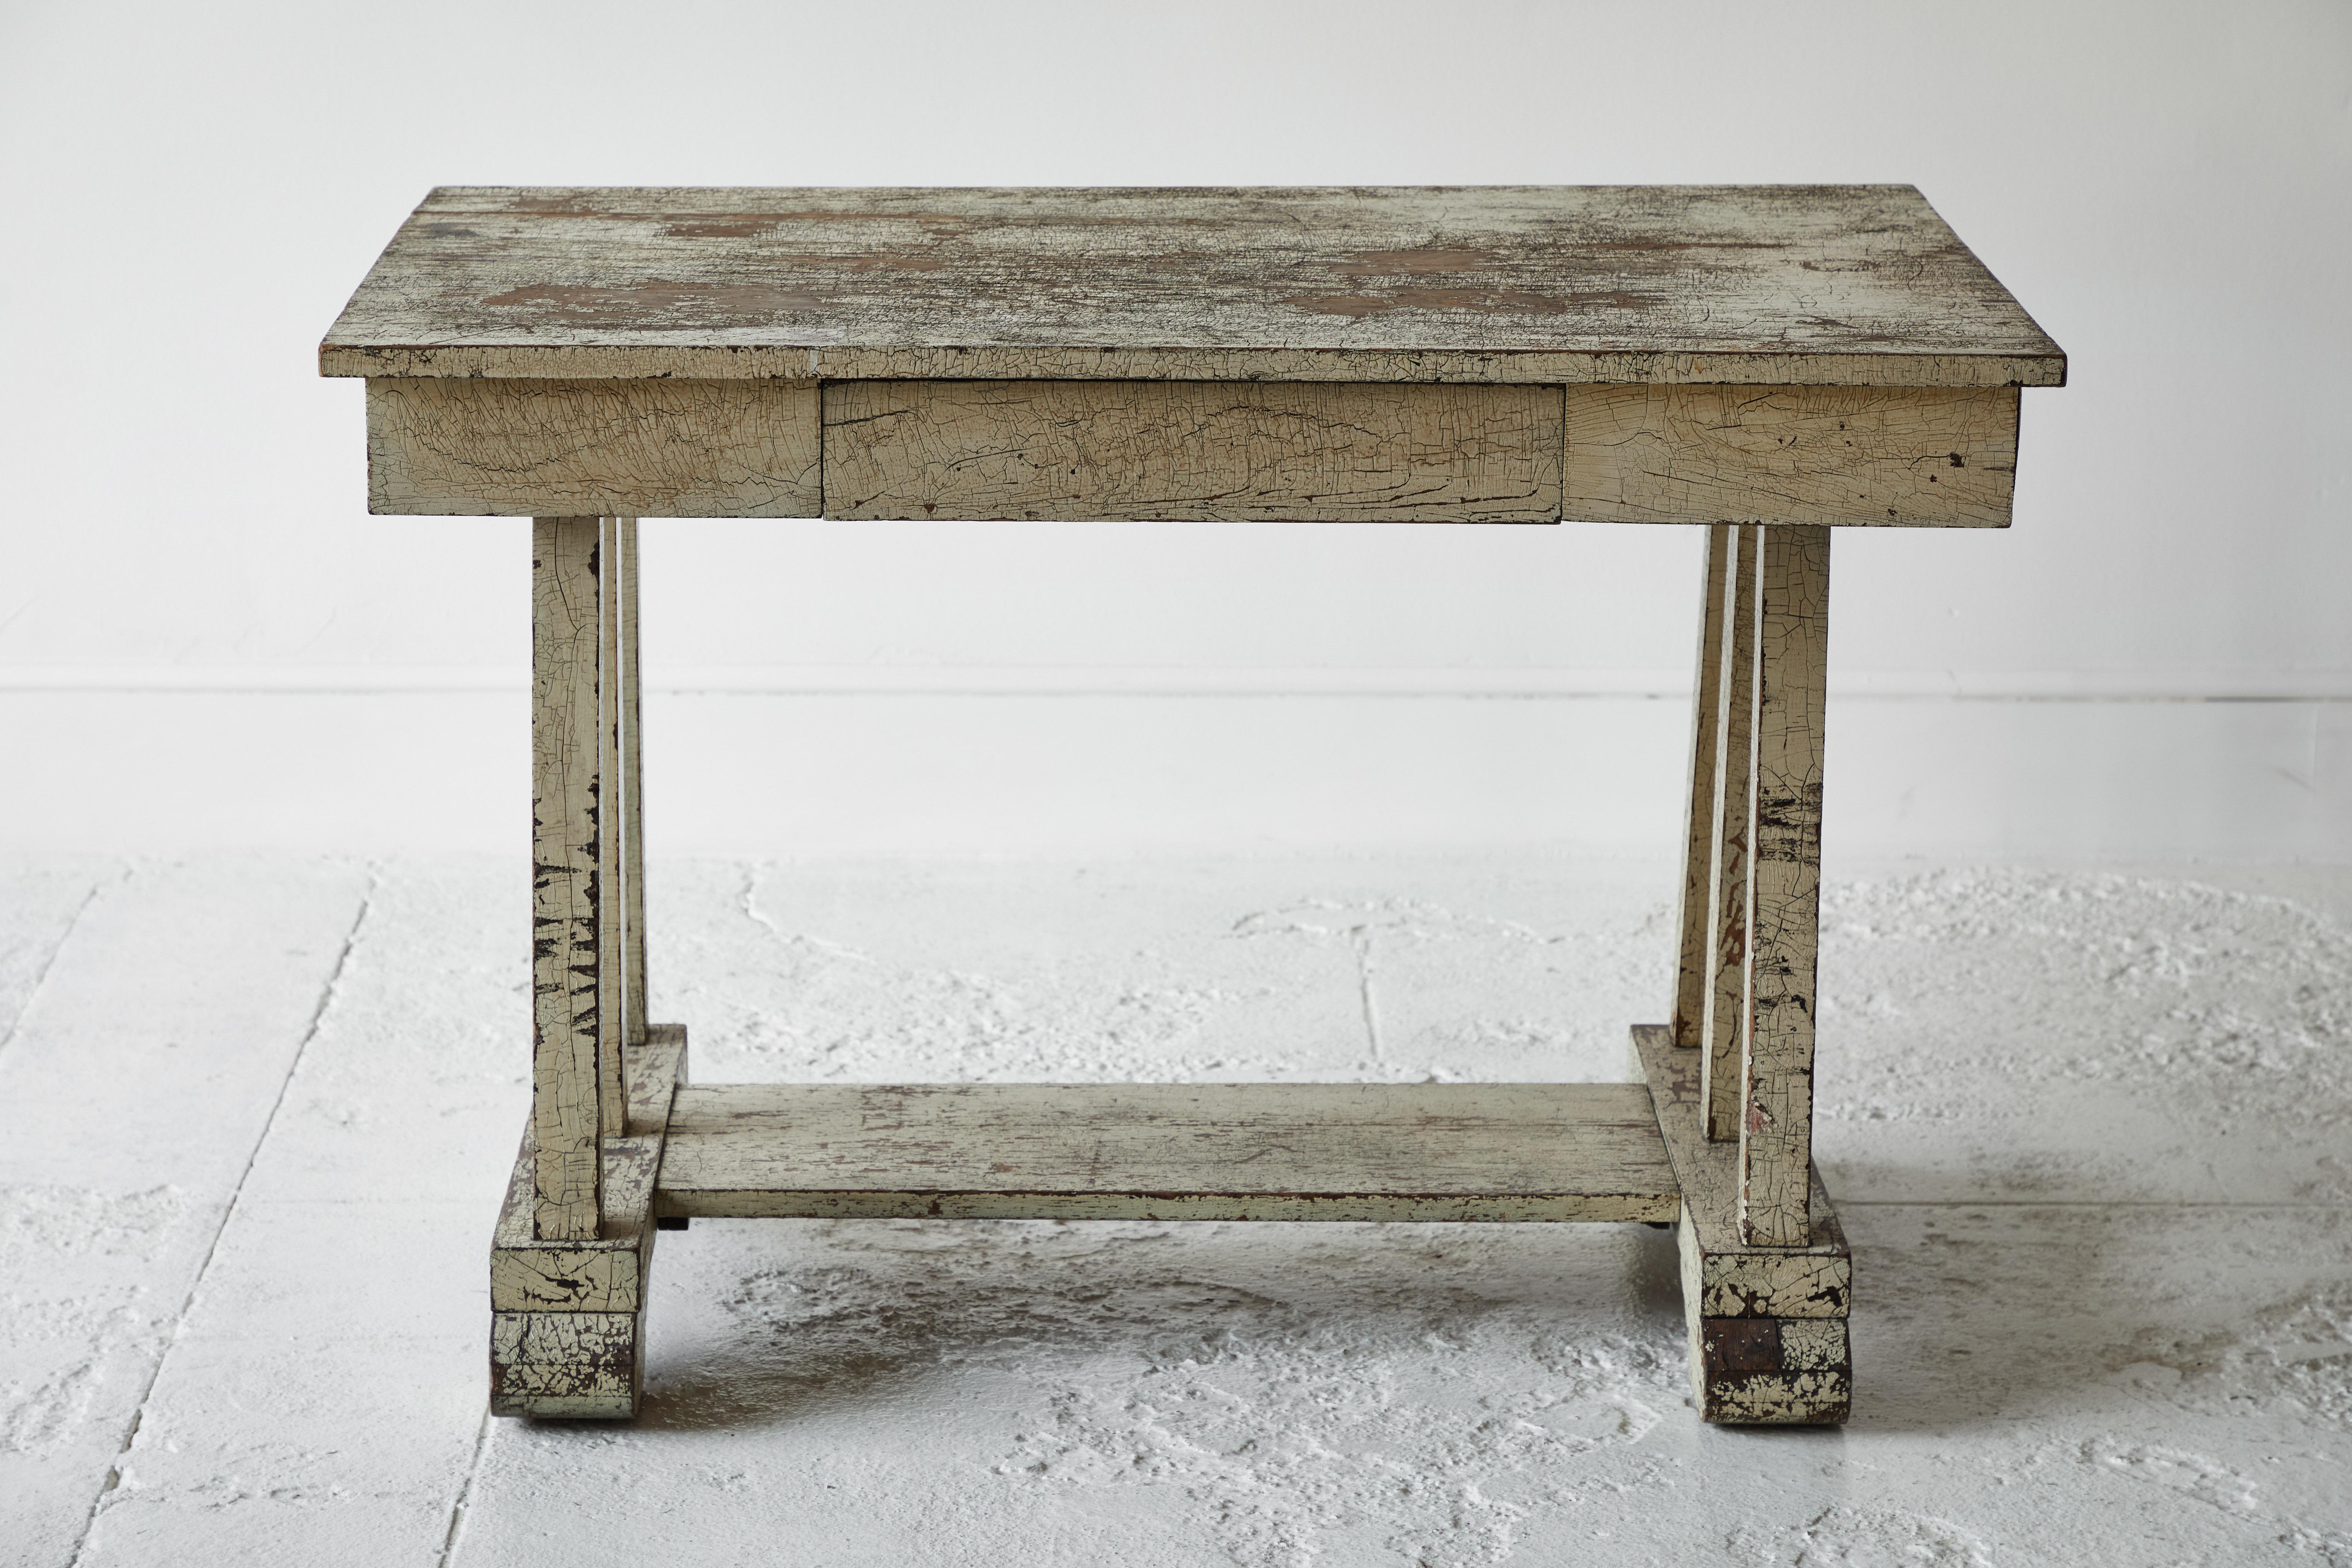 Rustic pale yellow painted desk with a stretcher base. The desk offers a single recessed drawer, original distressed paint adds to the rustic charm.